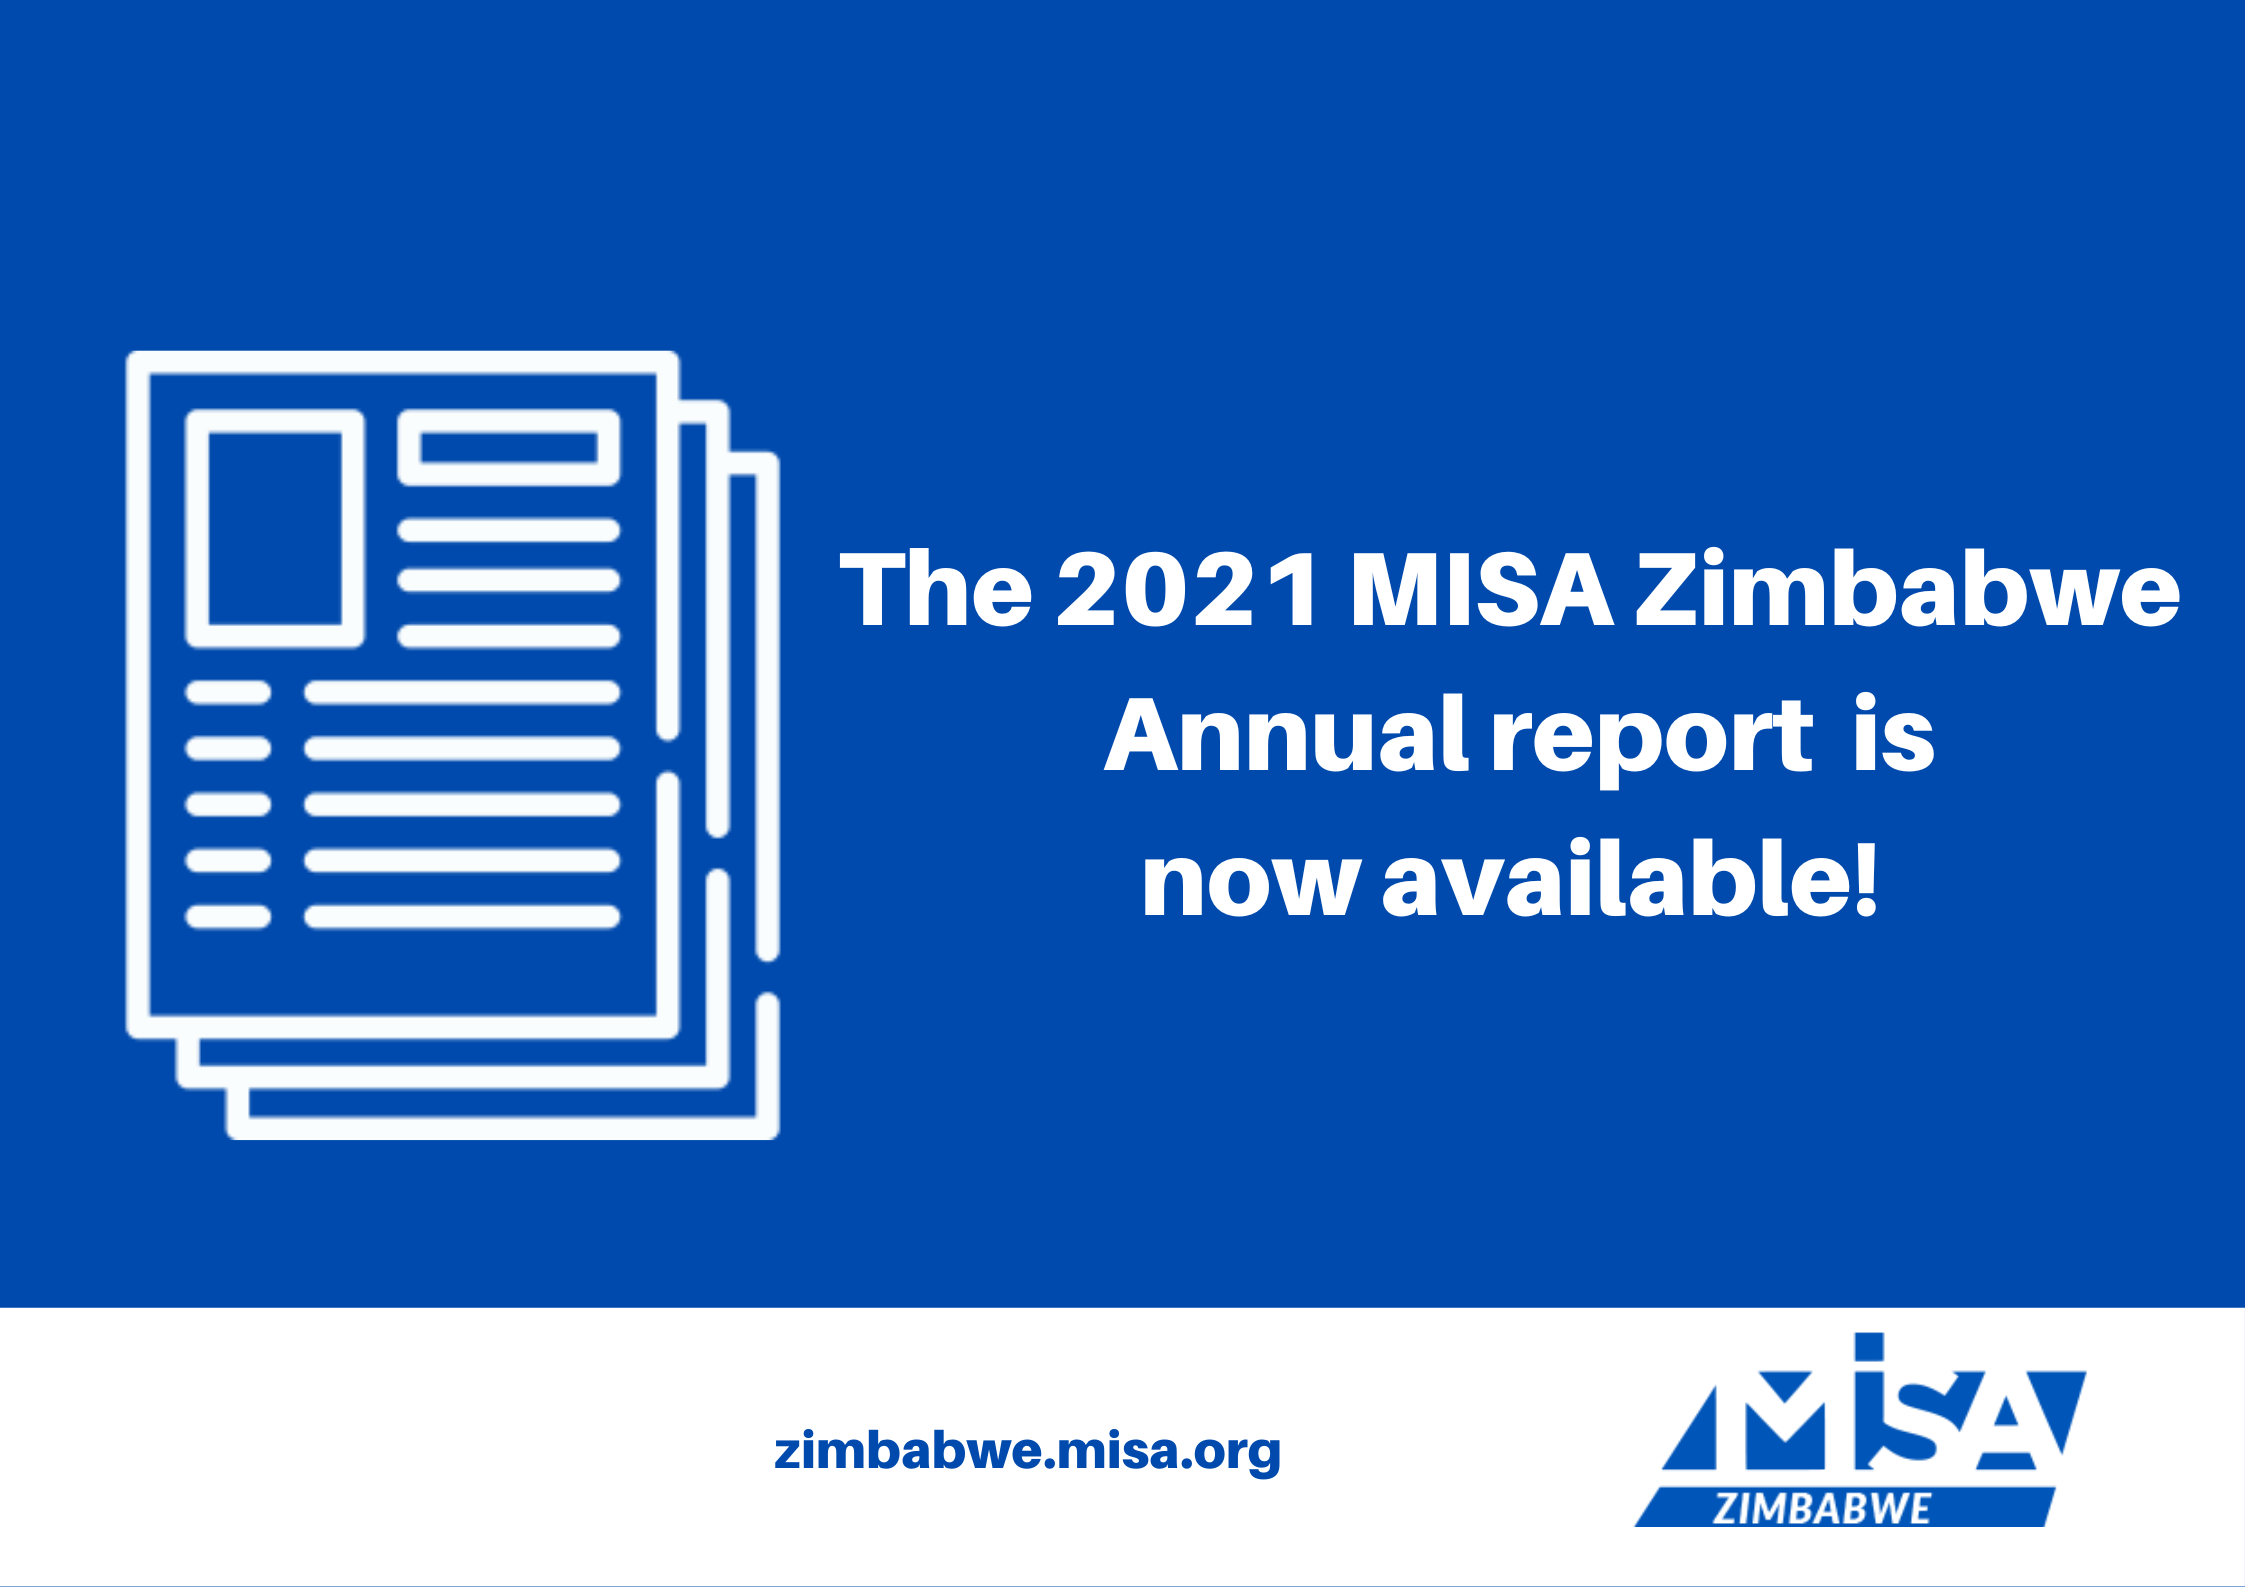 The 2021 MISA Zimbabwe Annual report is now available!